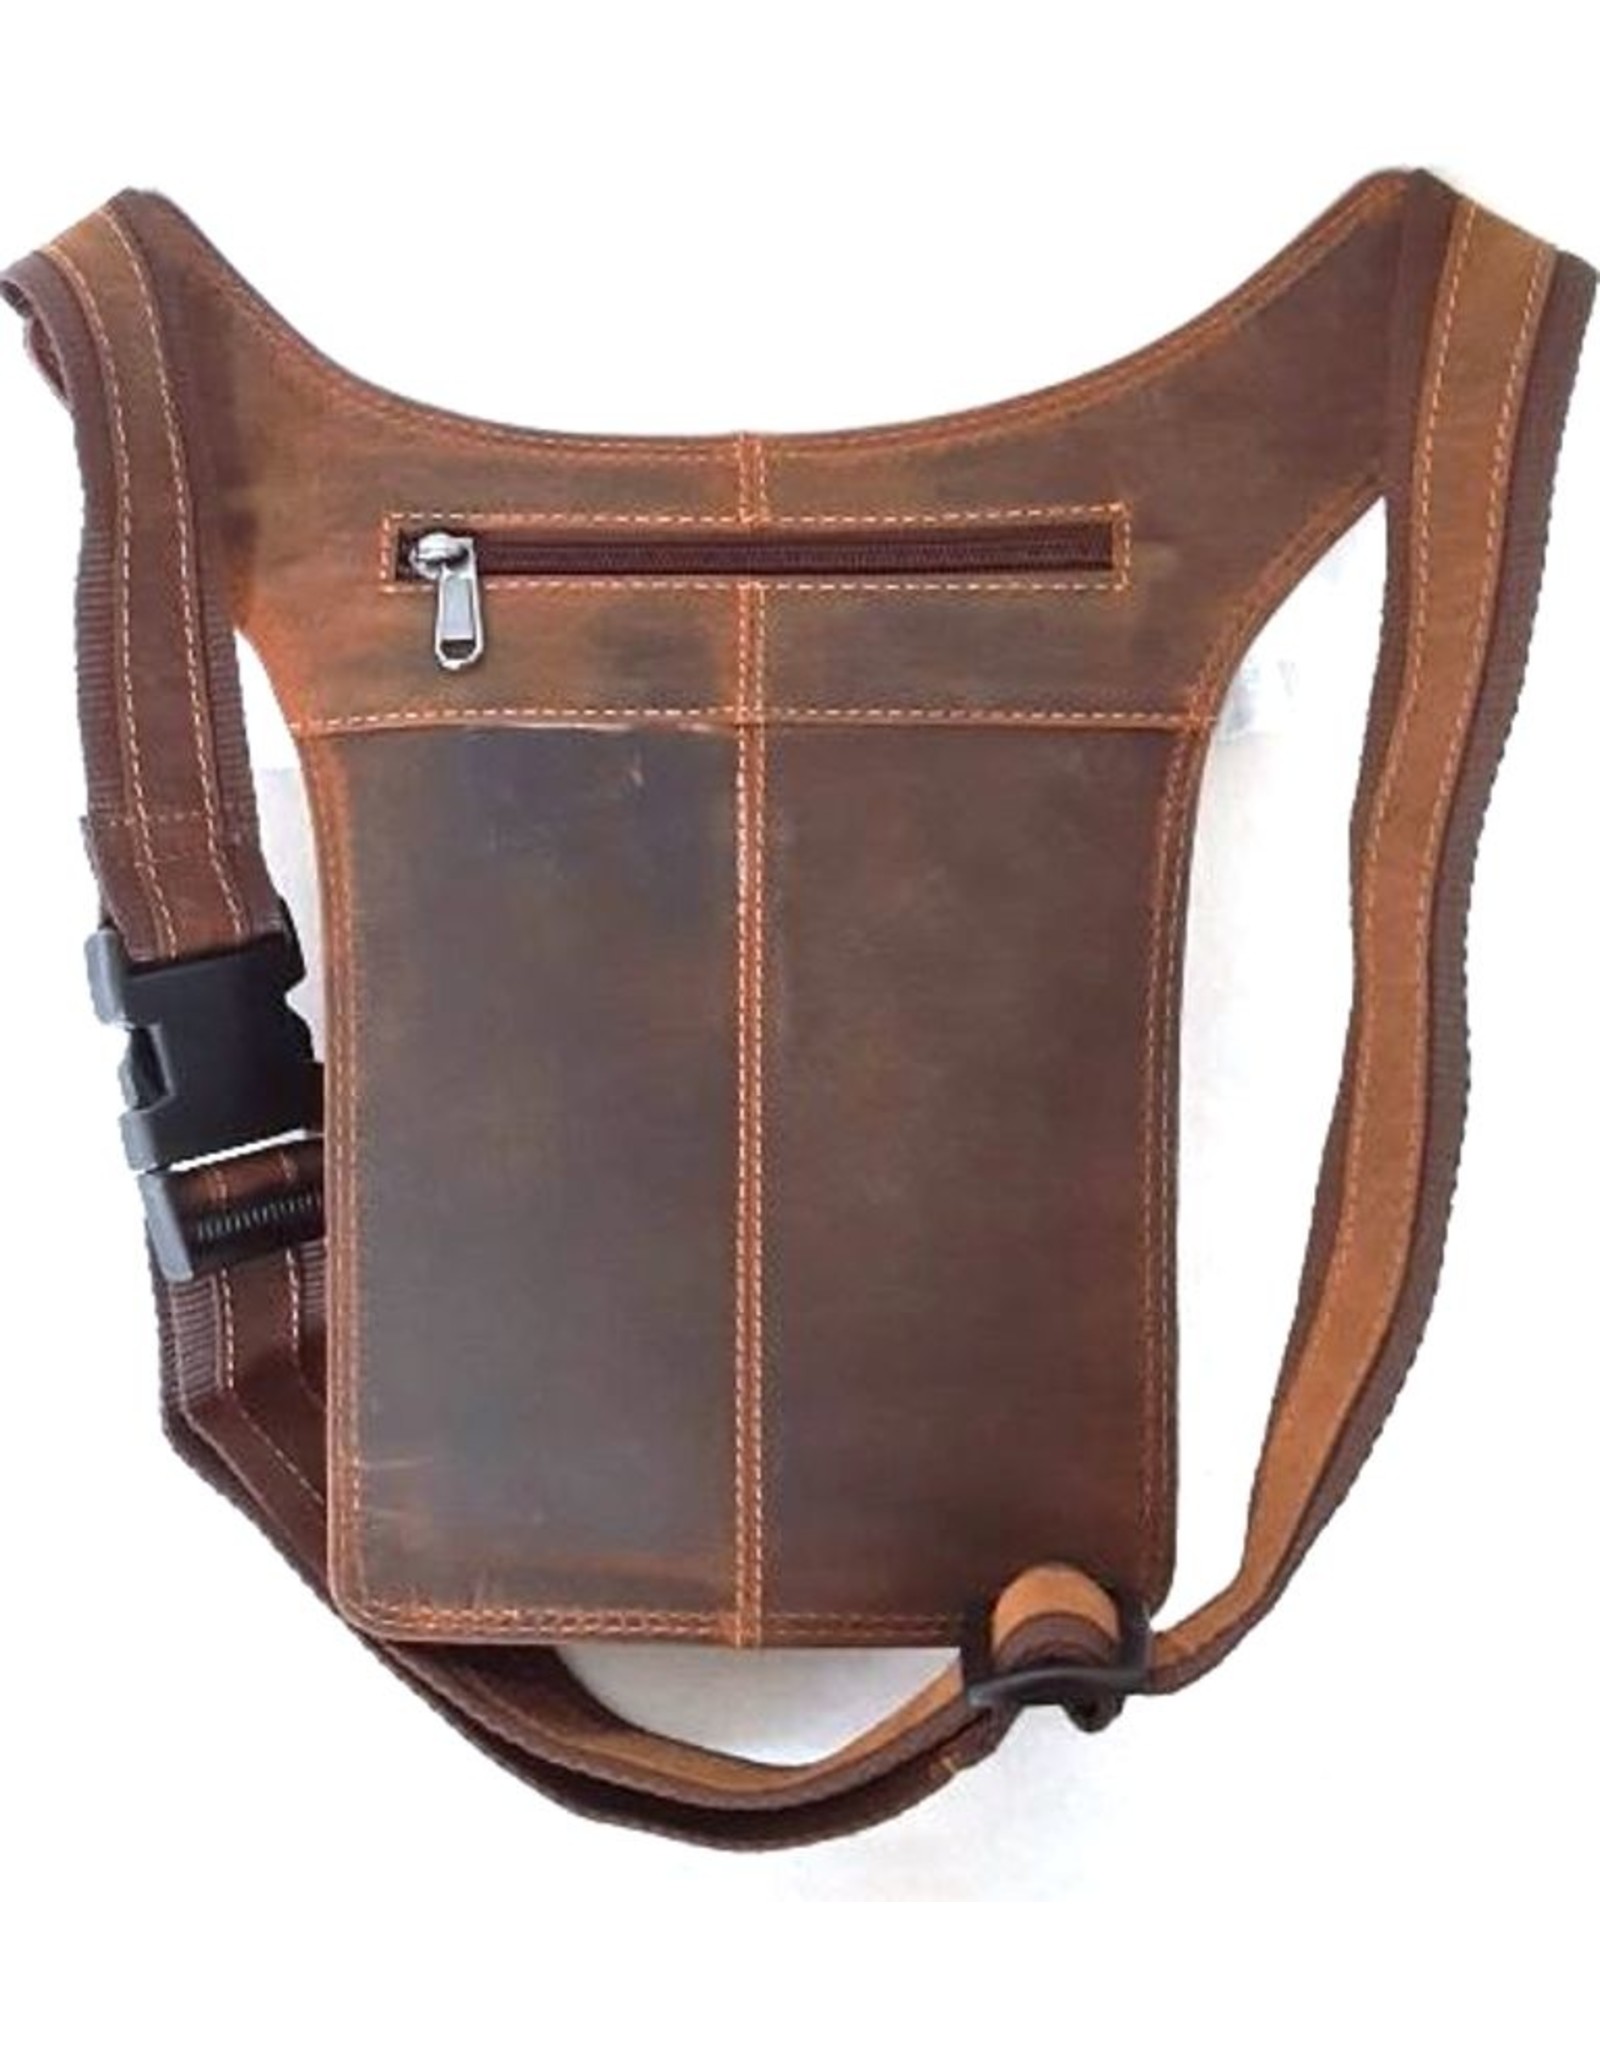 HillBurry Leather Festival bags, waist bags and belt bags - HillBurry hip bag from quality leather mango tan